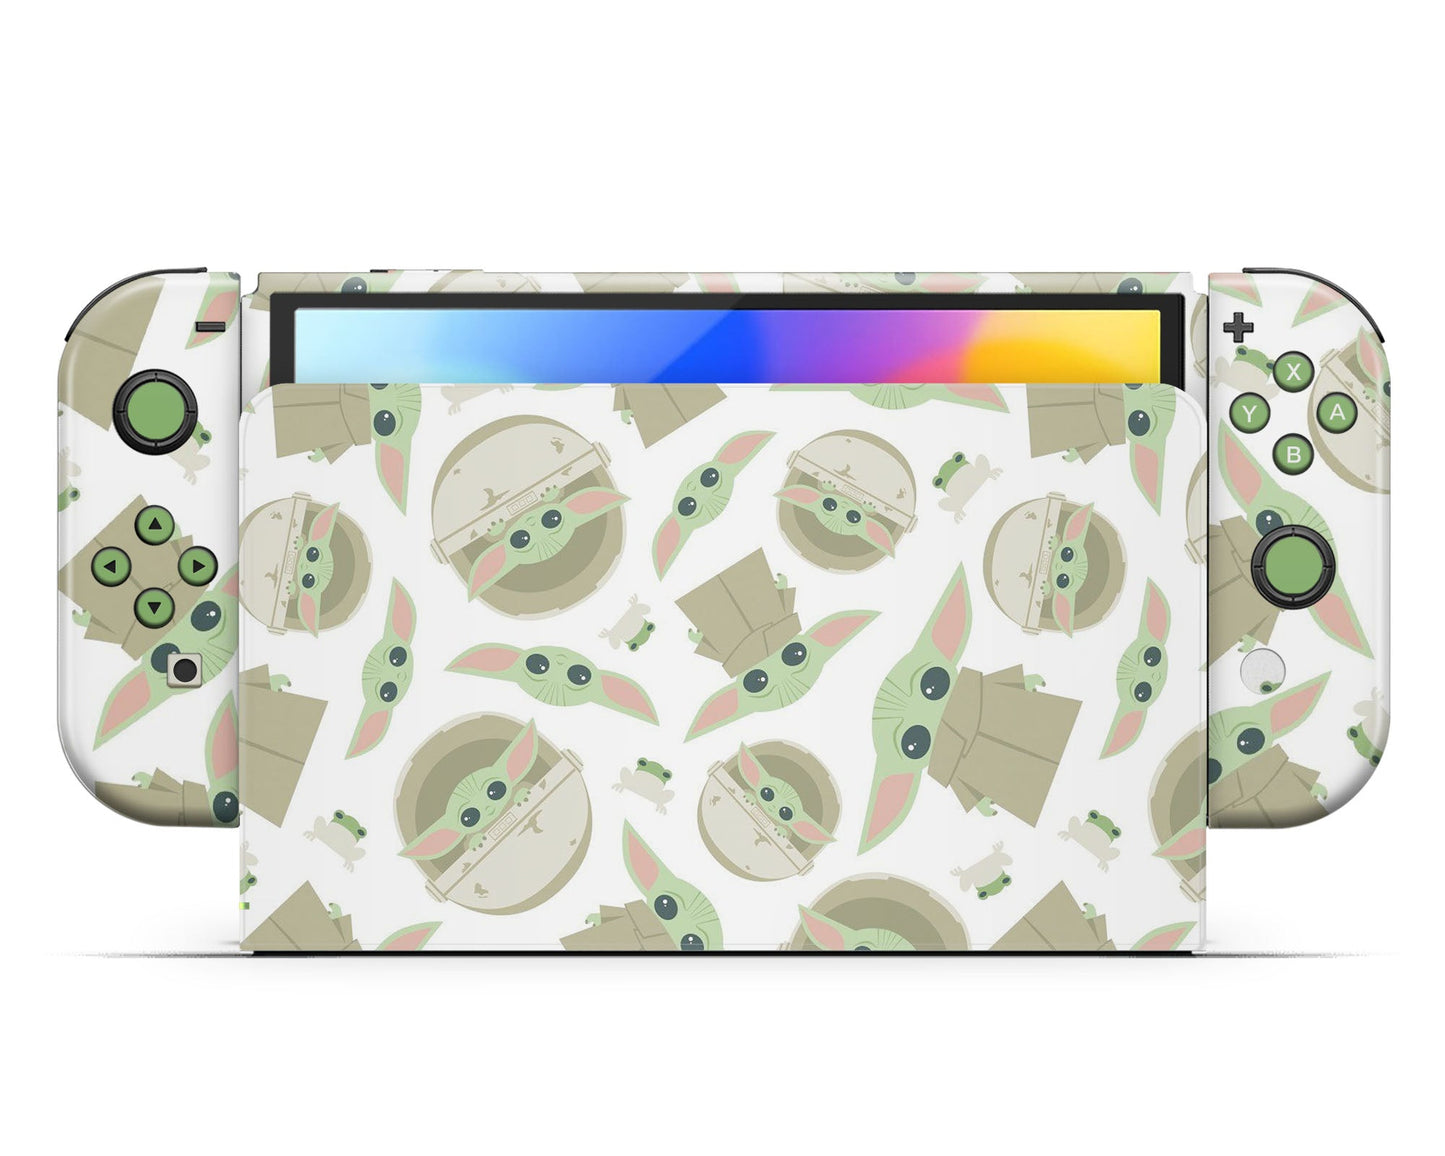 Lux Skins Nintendo Switch OLED Green Baby Yoda Pattern Joycons Only Skins - Pop culture Star Wars Skin